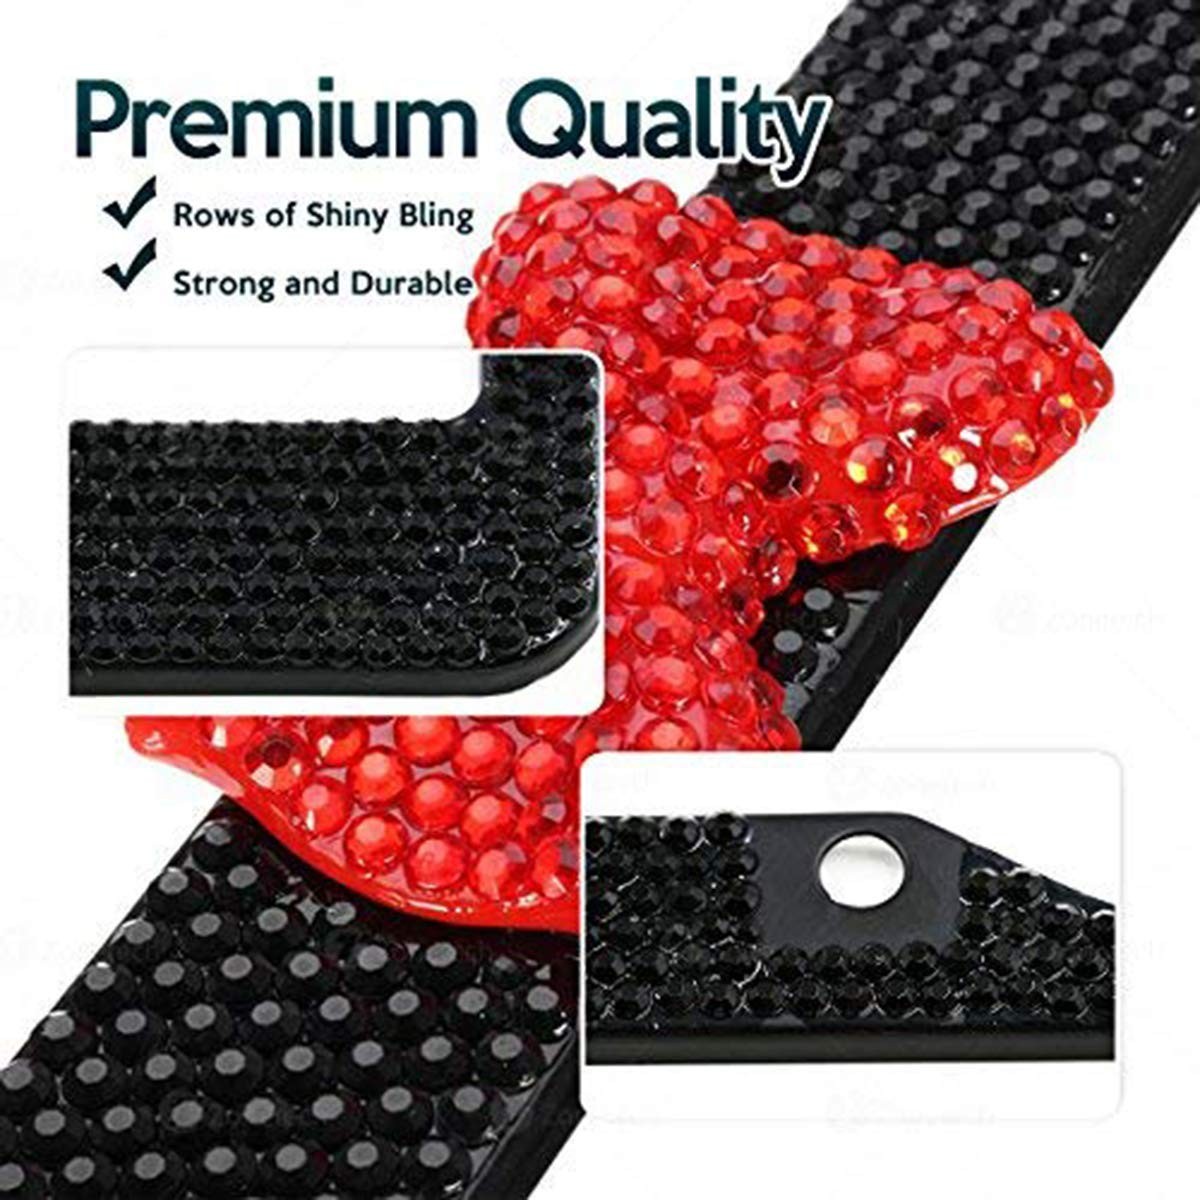 2-Pack Crystal Black with Red Ribbon Bow Premium Quality Novelty/License Plate Frame with Mounting Screws Zone Tech Shiny Bling Women License Plate Cover Frame 